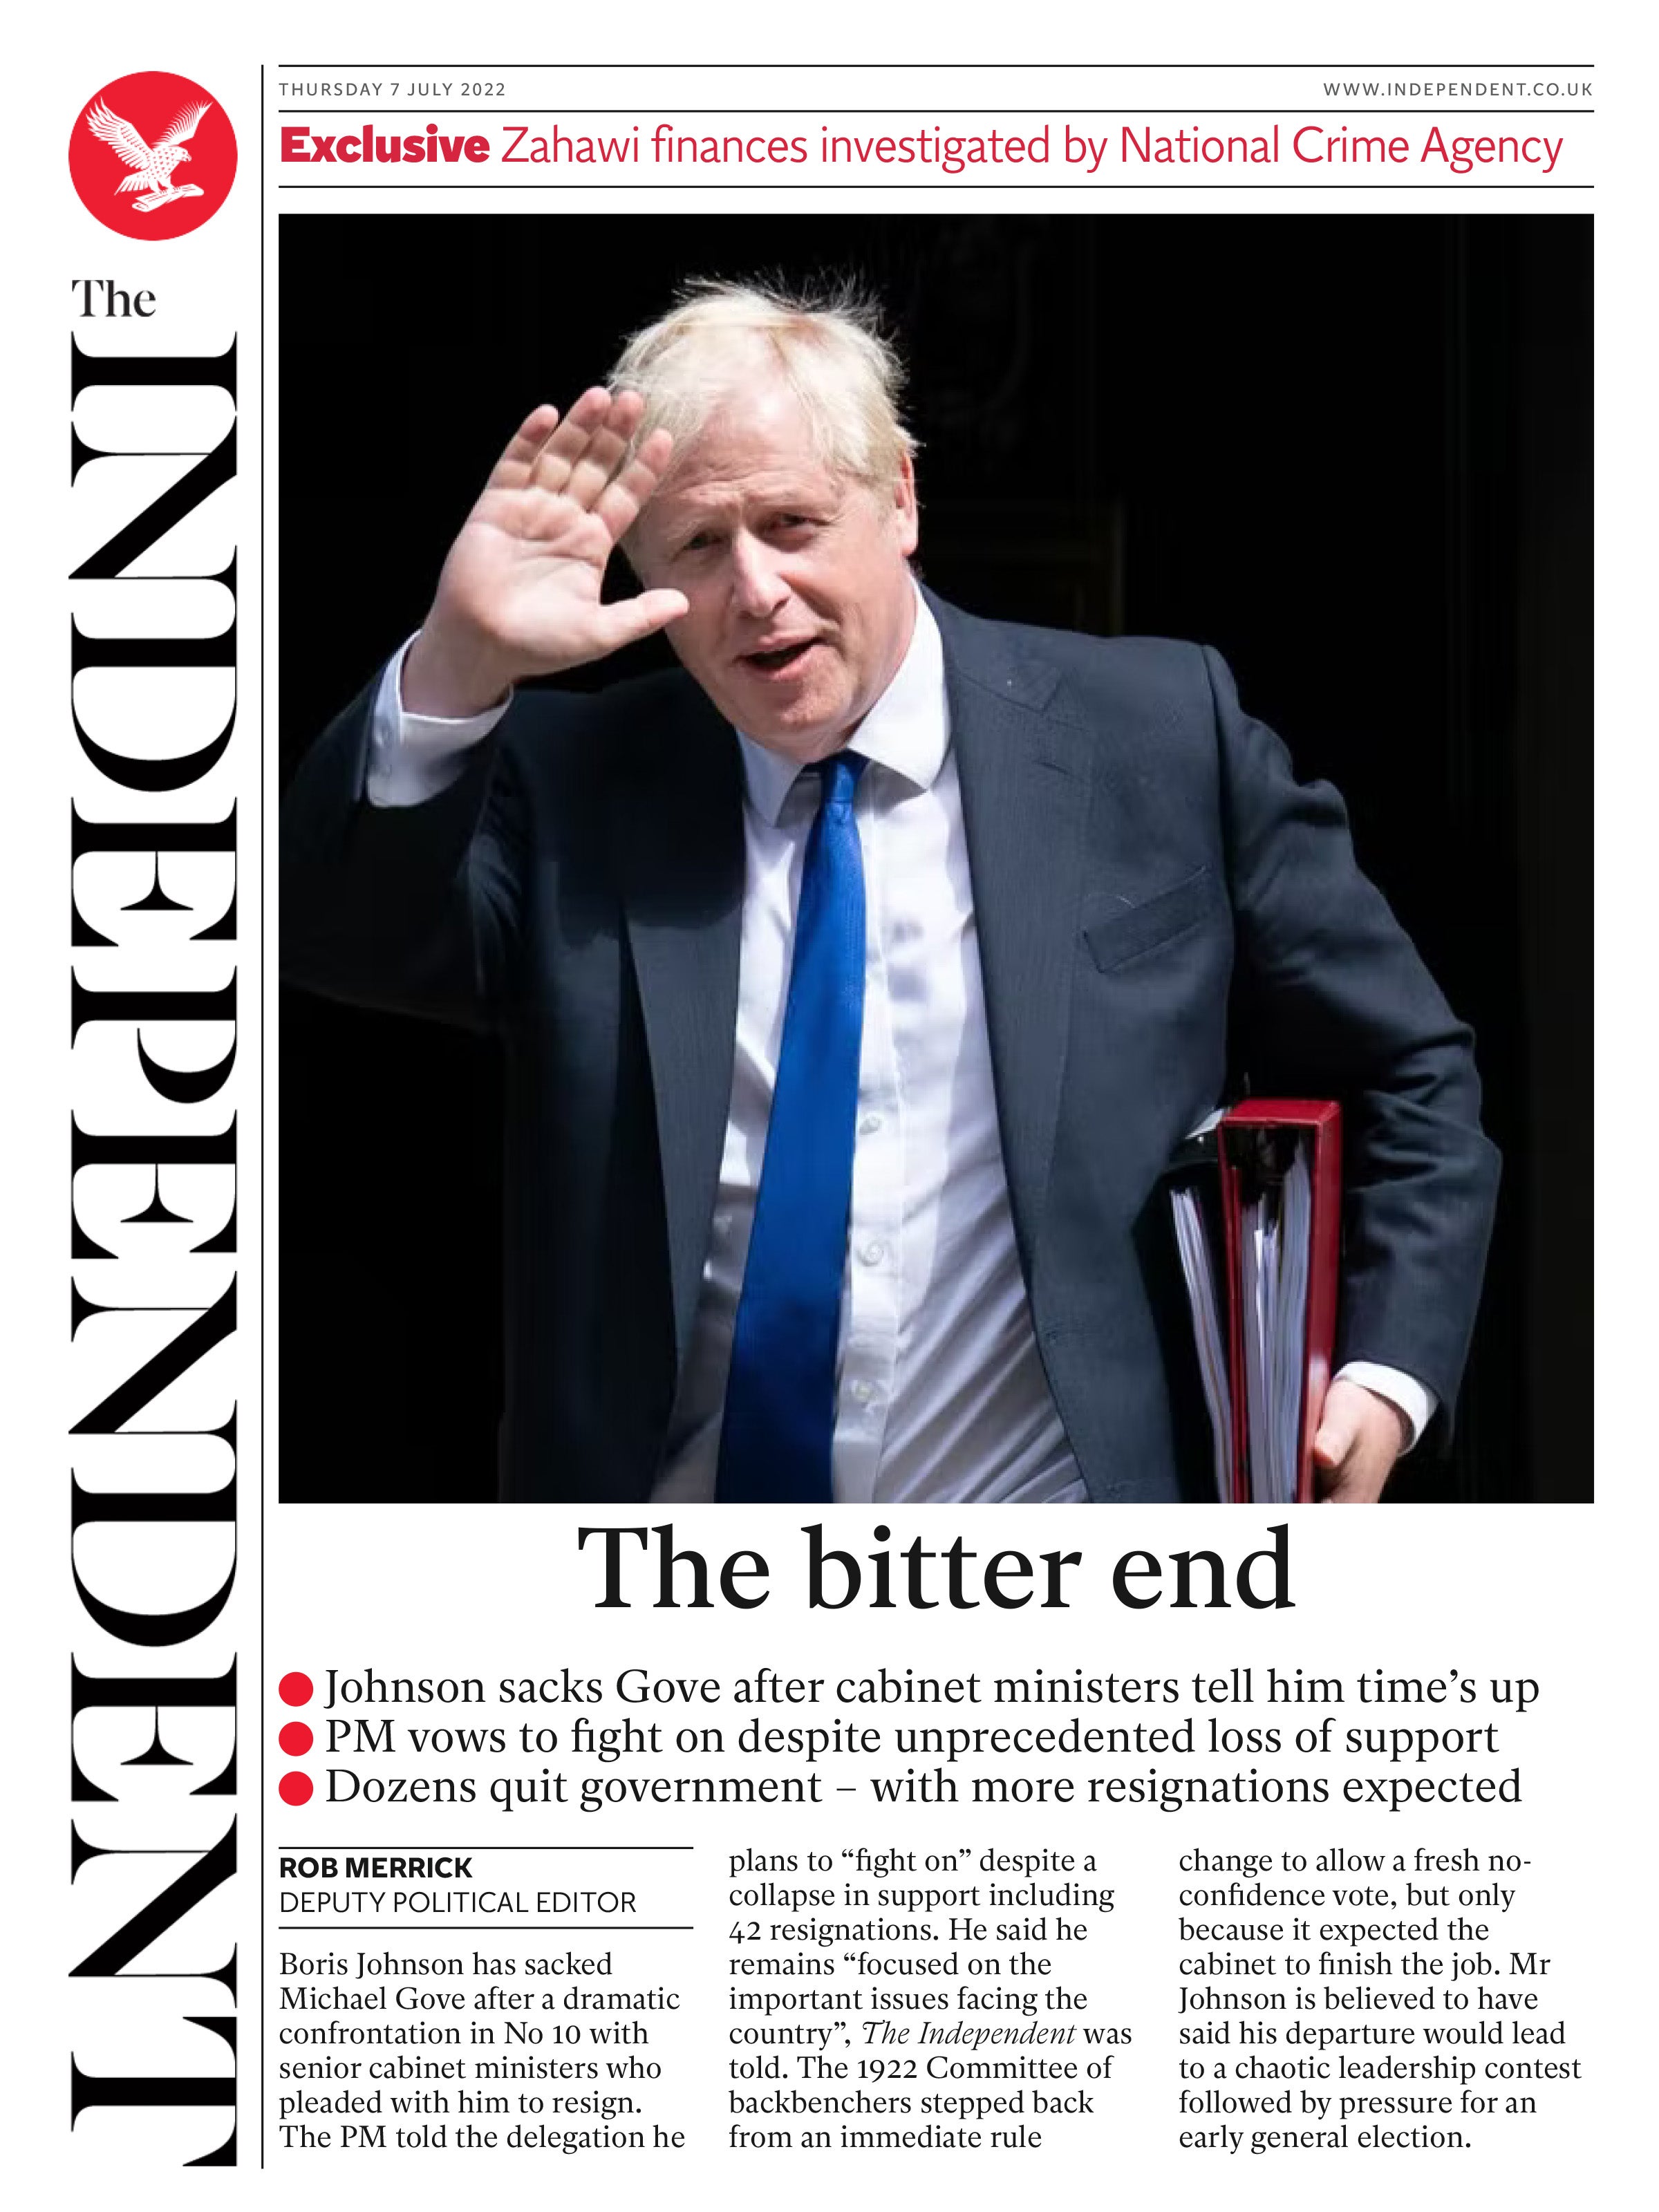 The investigation was sparked by The Independent’s revelation of an HMRC investigation into the MP over his tax affairs